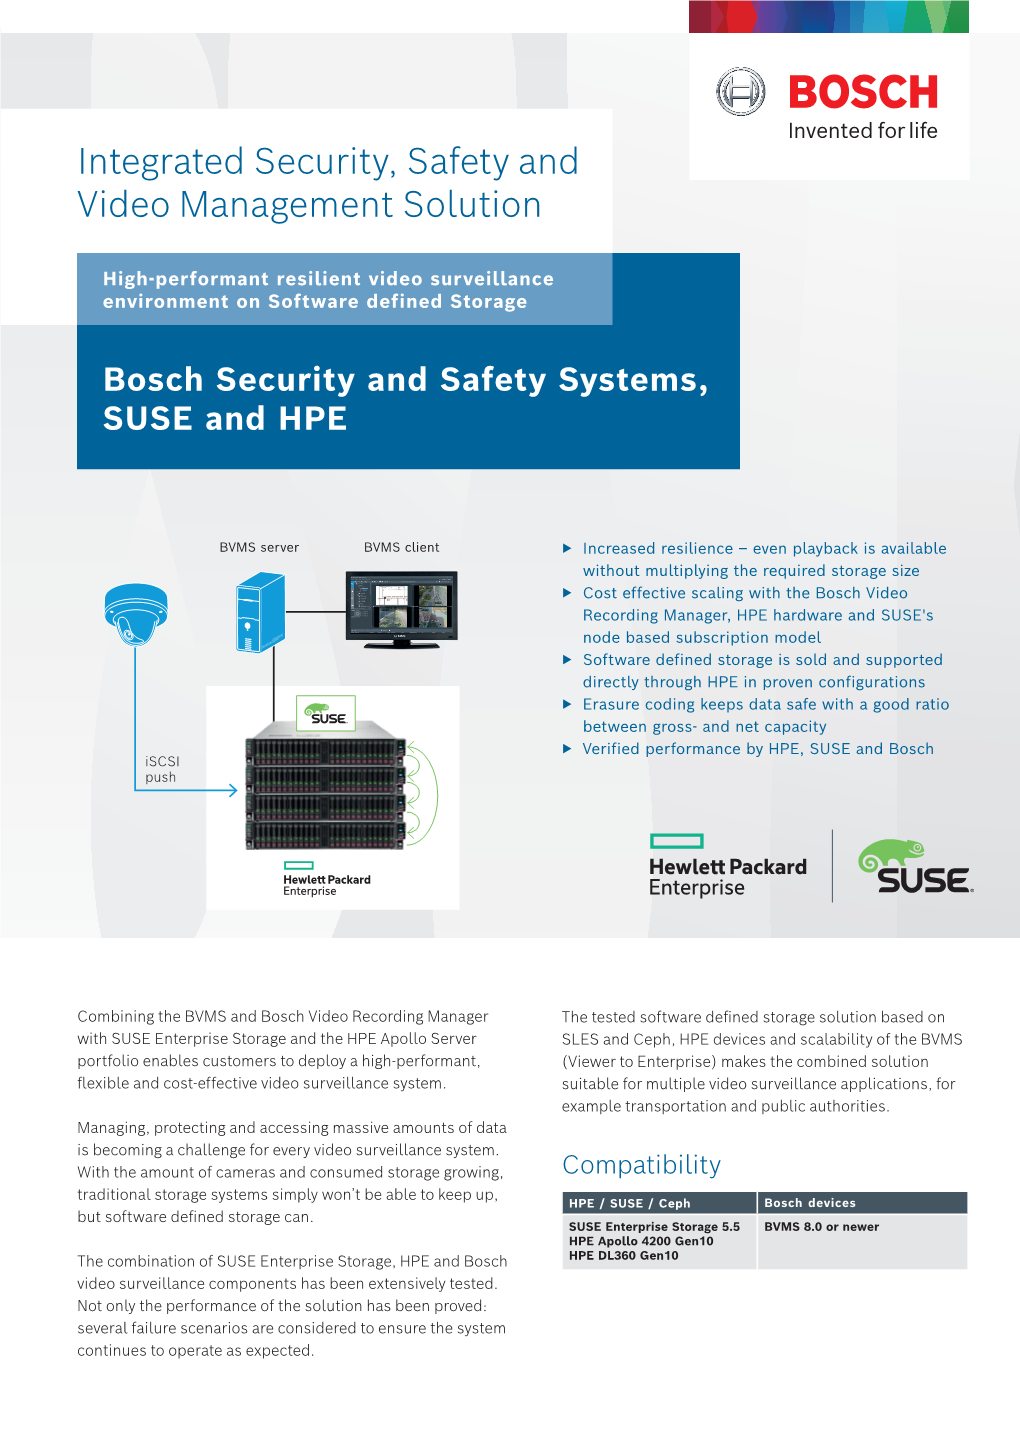 Integrated Security, Safety and Video Management Solution